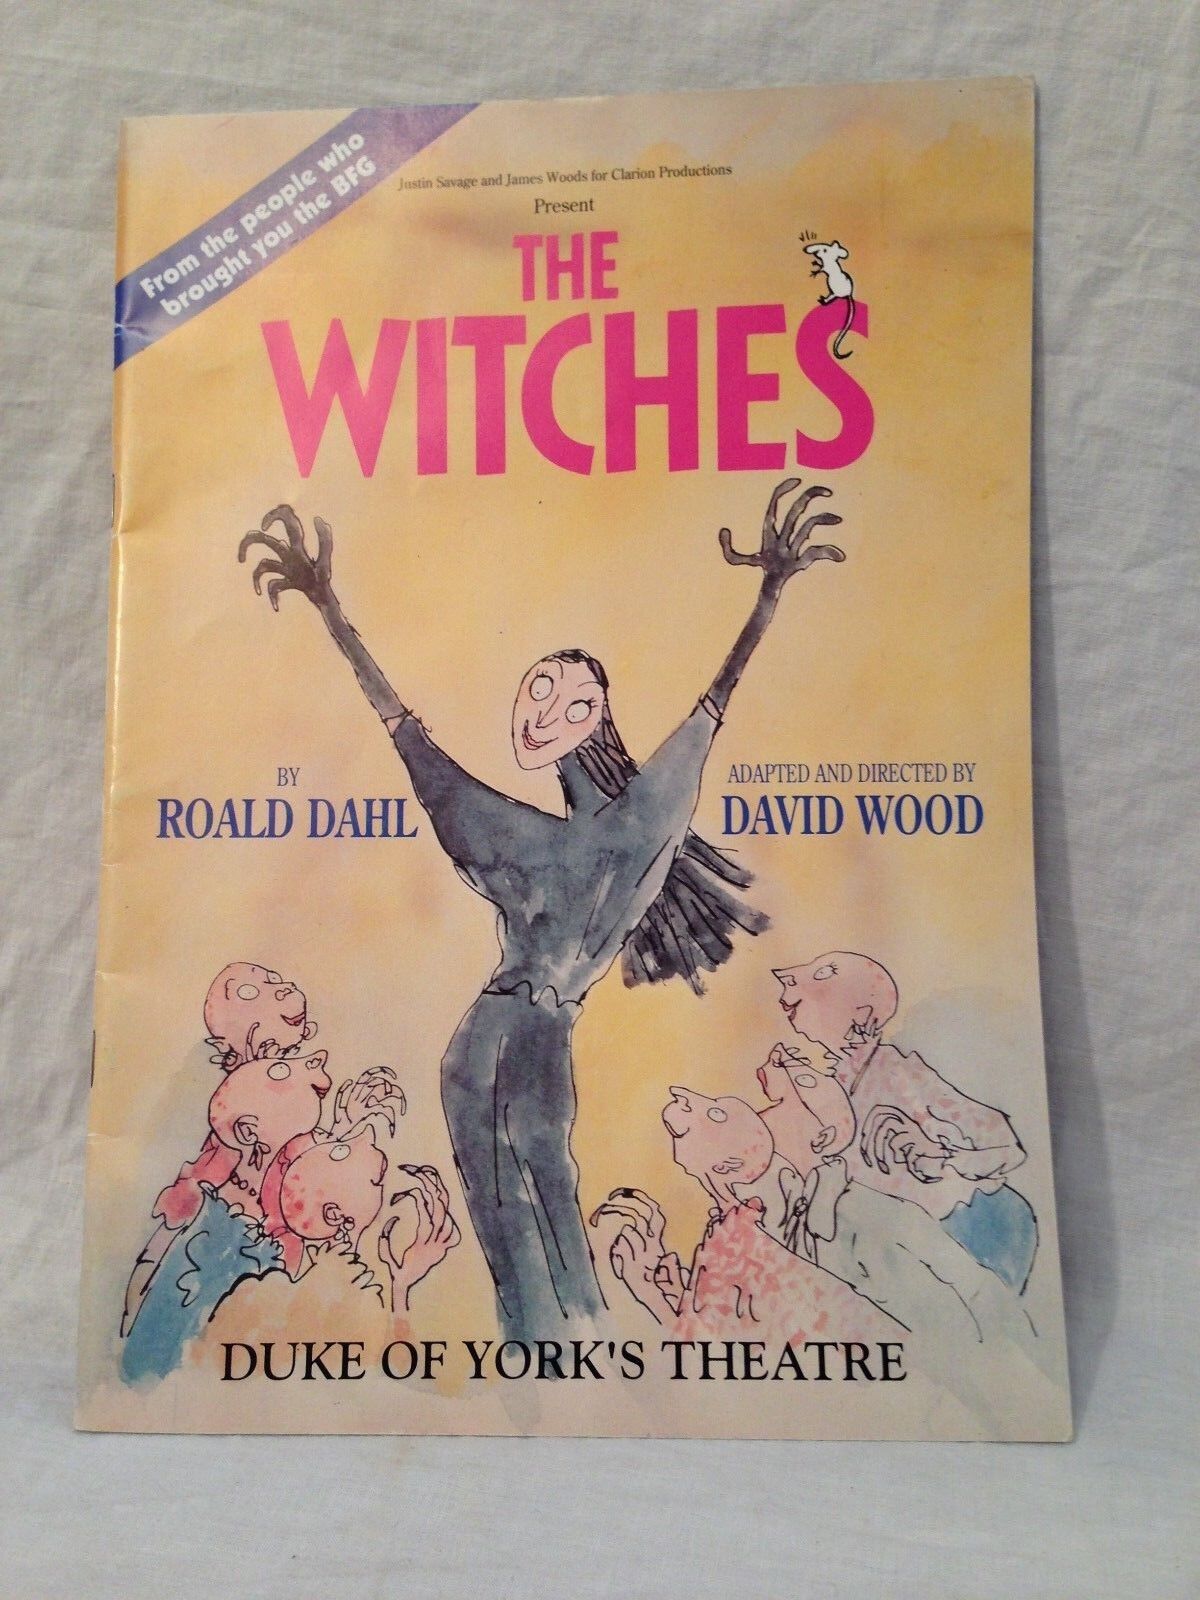 Roald Dahl / Quentin Blake - David Wood - THE WITCHES, Theatrical Programme 1992